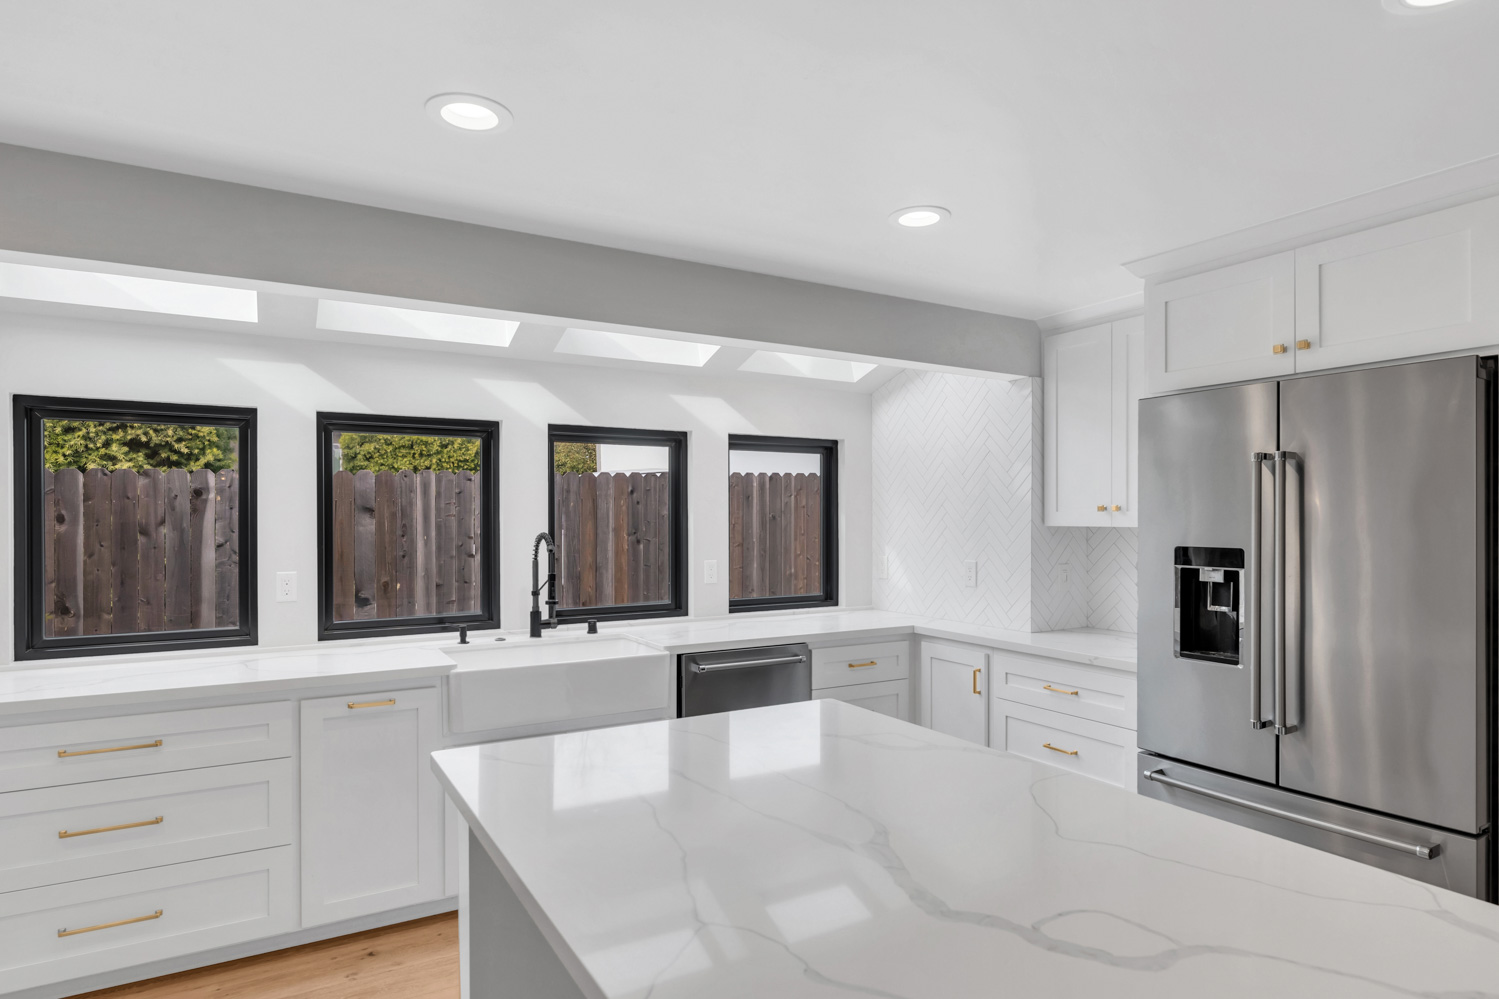 View Our Kitchen Remodeling Services